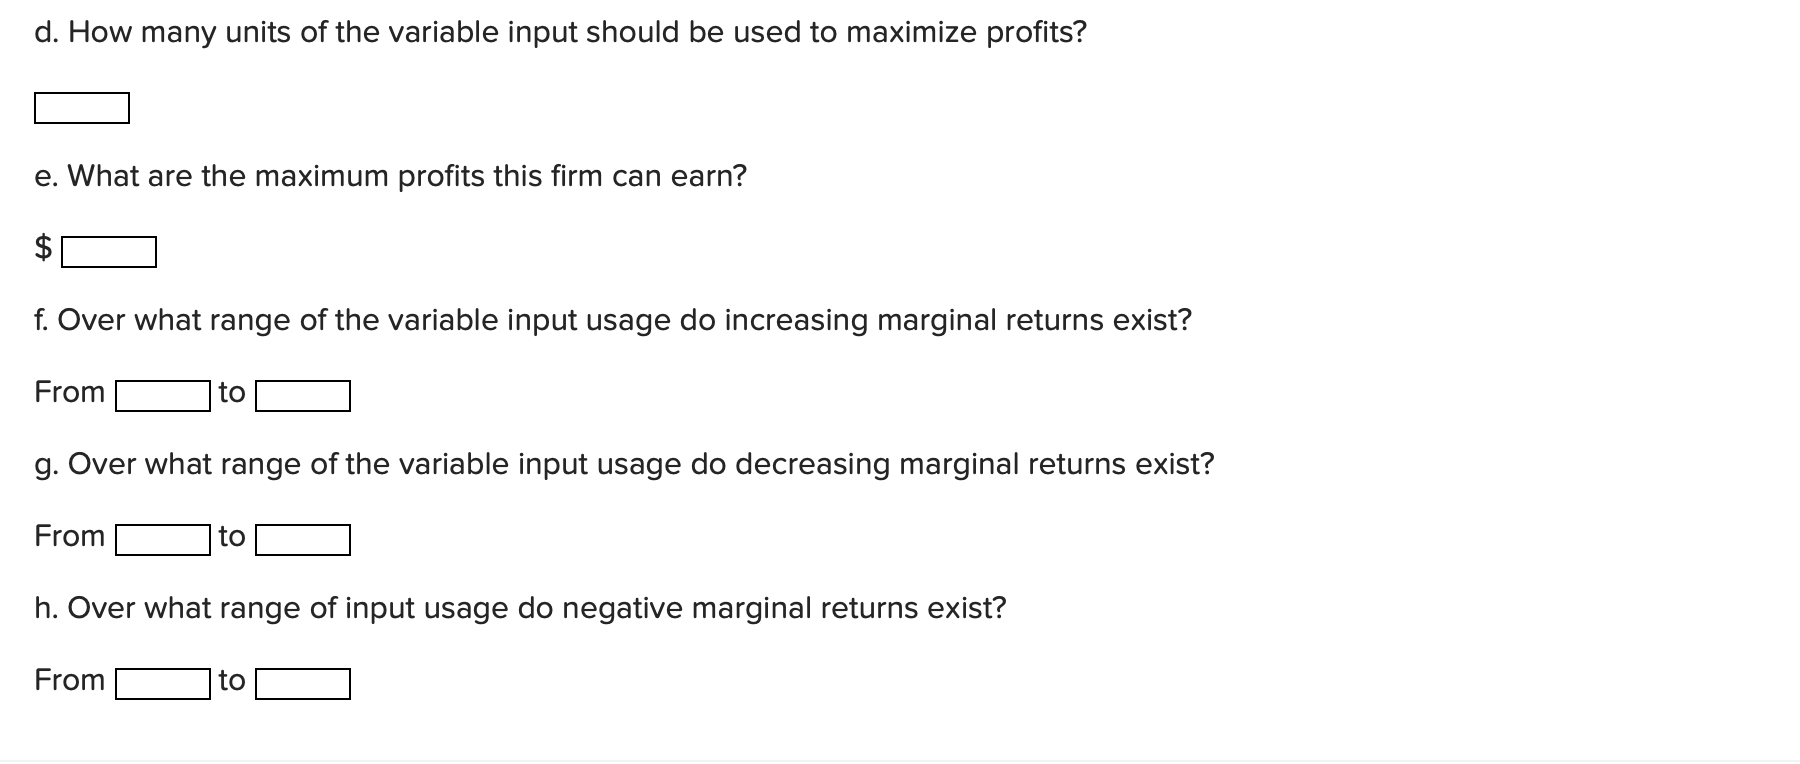 d. How many units of the variable input should be used to maximize profits?
e. What are the maximum profits this firm can ear